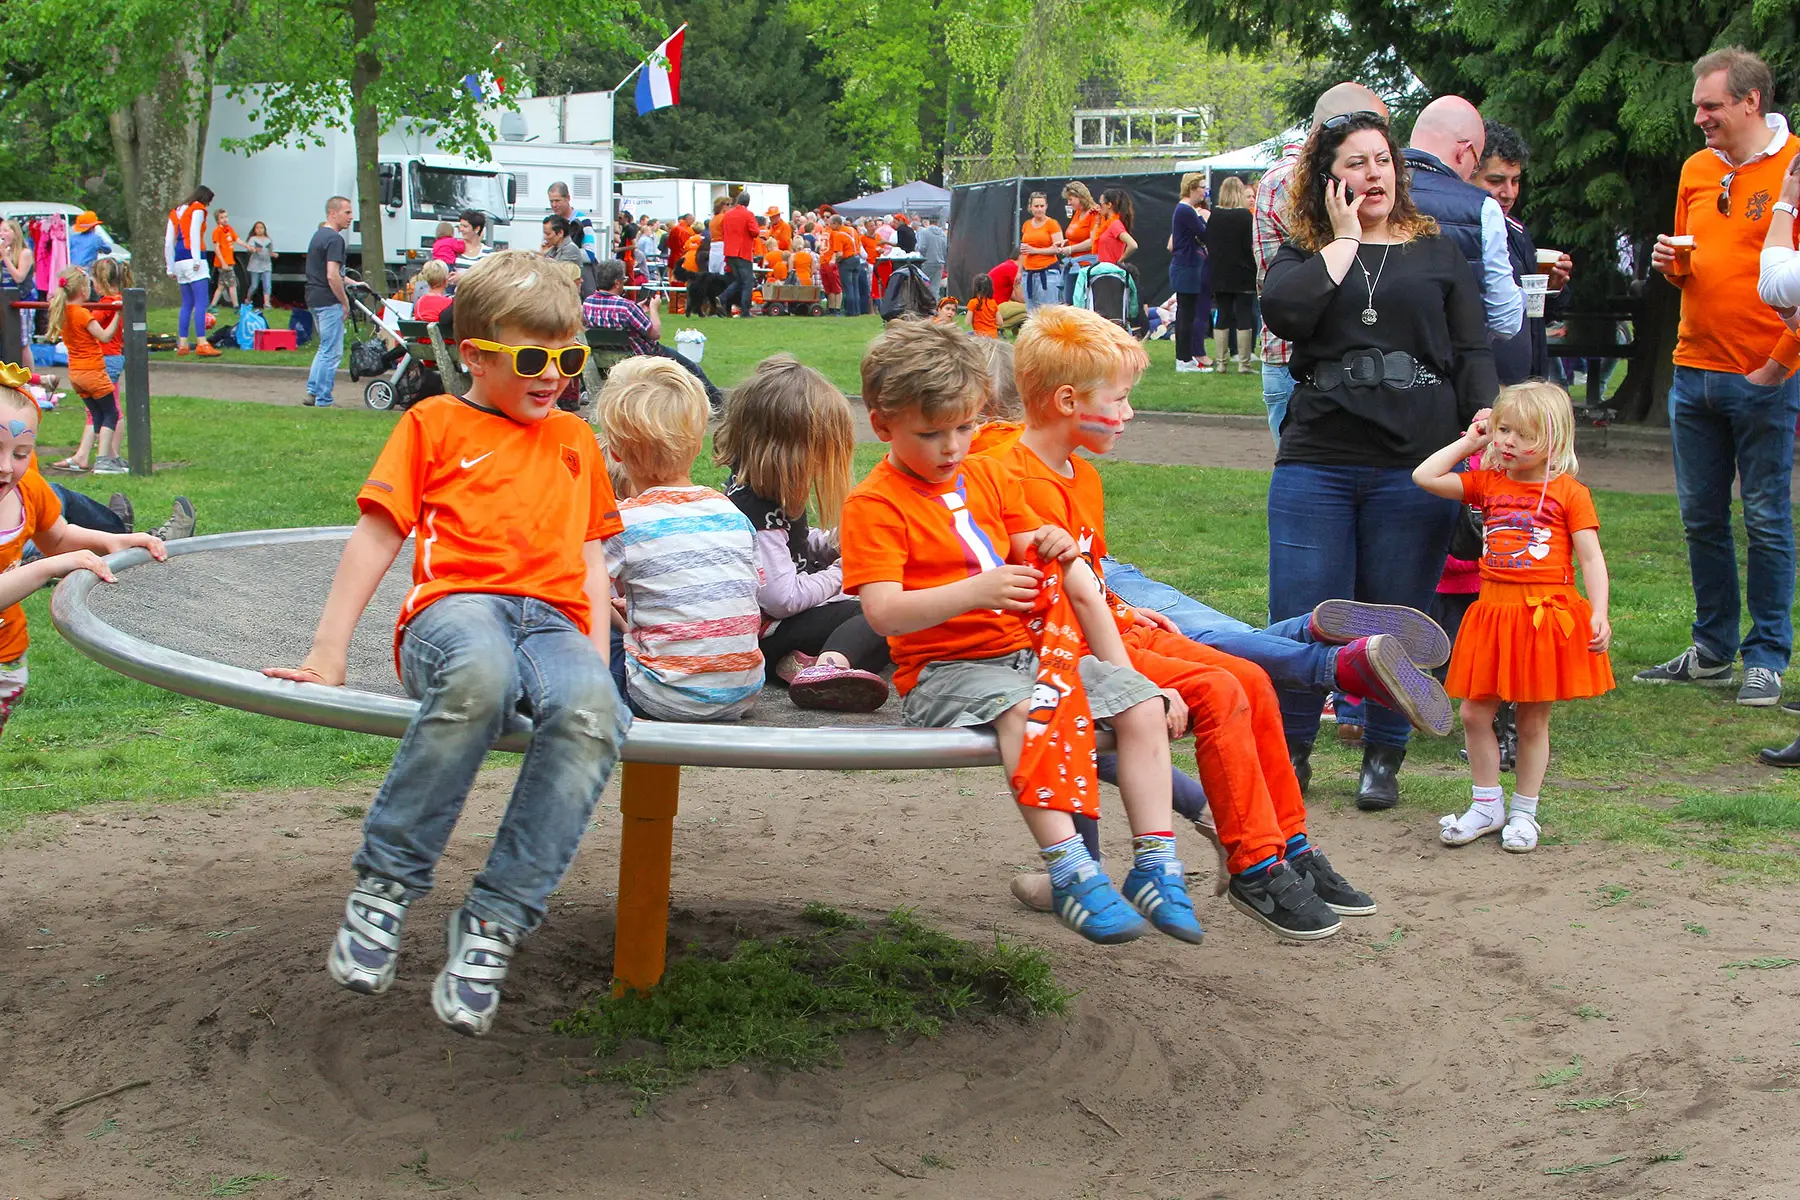 Kids on a roundabout in a play area on King's Day